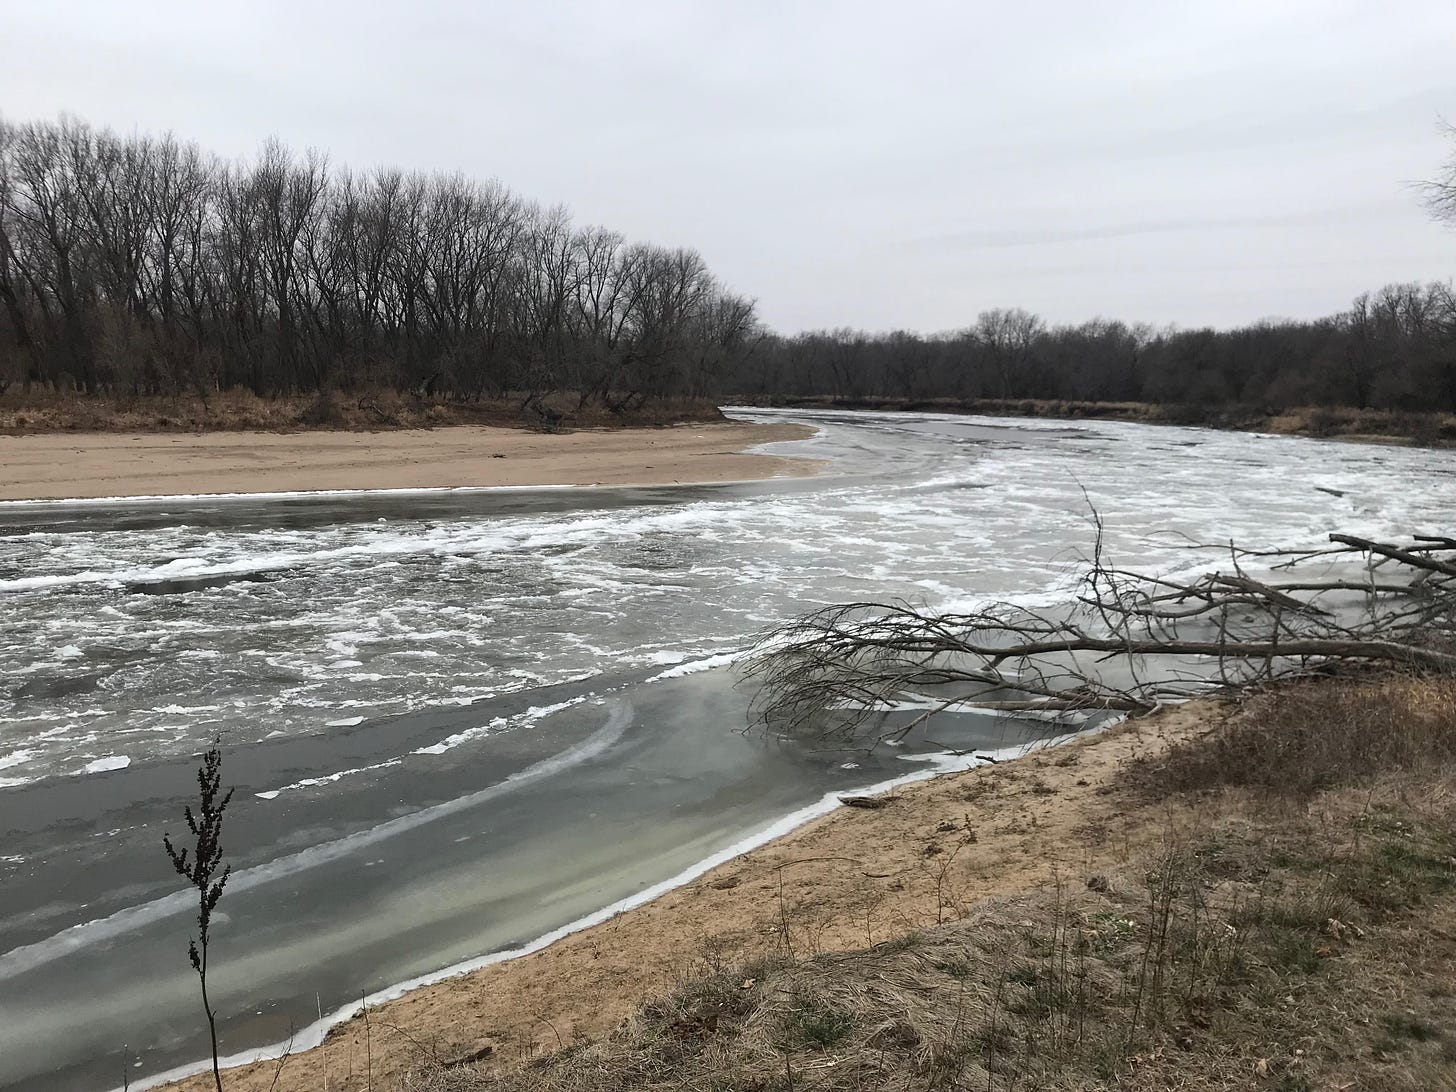 Iowa River nearly covered with ice, trees on the far bank and sandbars on both sides, with fallen trees on the near bank.